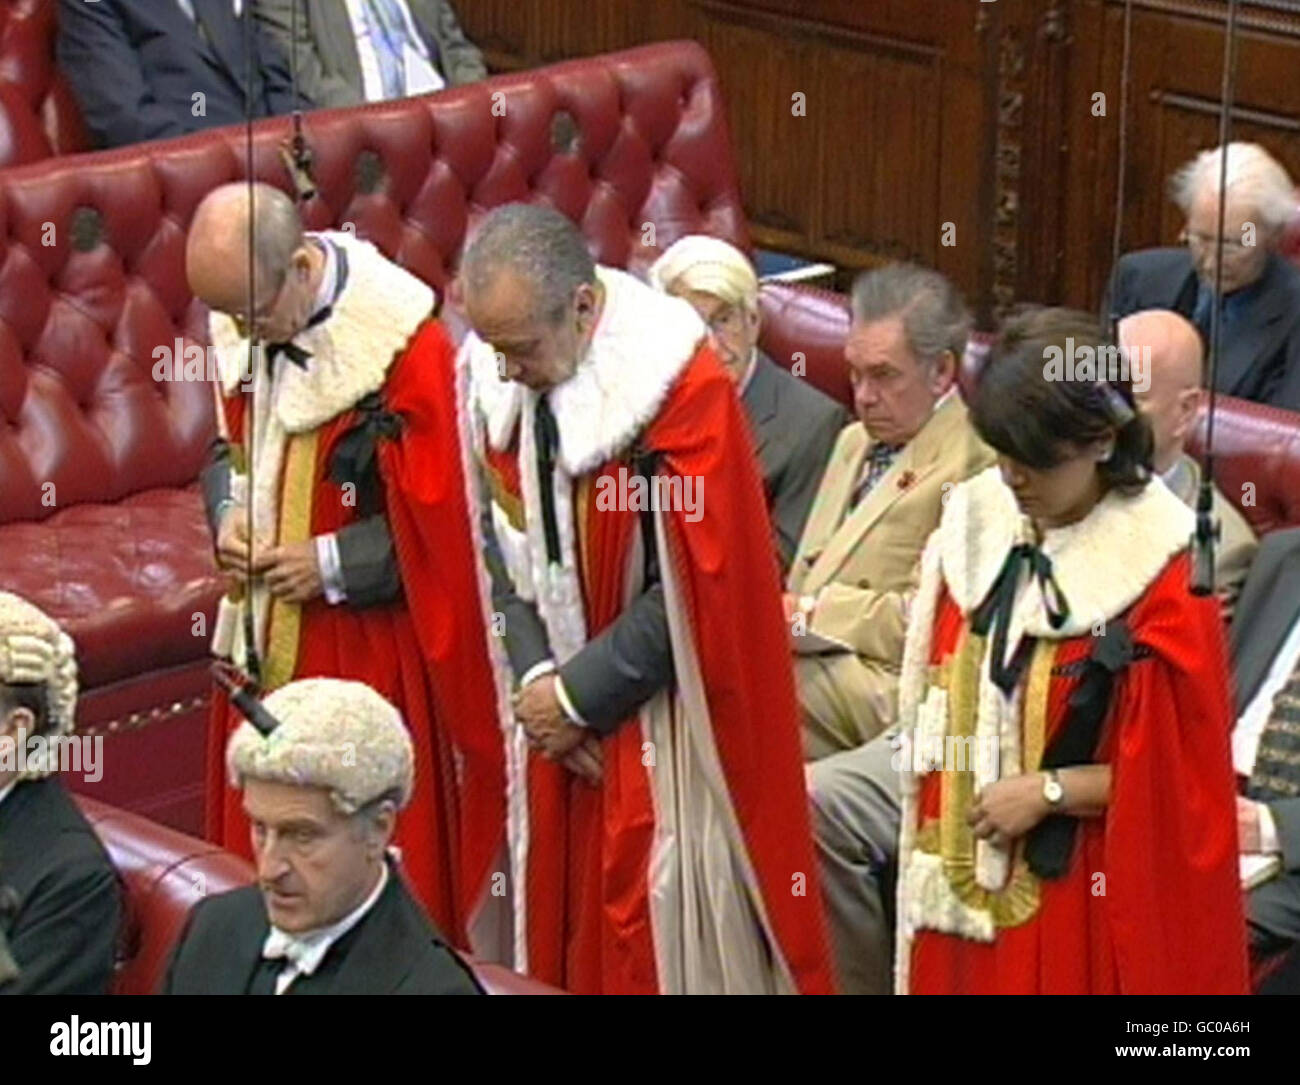 Sir Alan Sugar (centre) takes up his seat in the House of Lords, London, during a traditional ceremony. Stock Photo